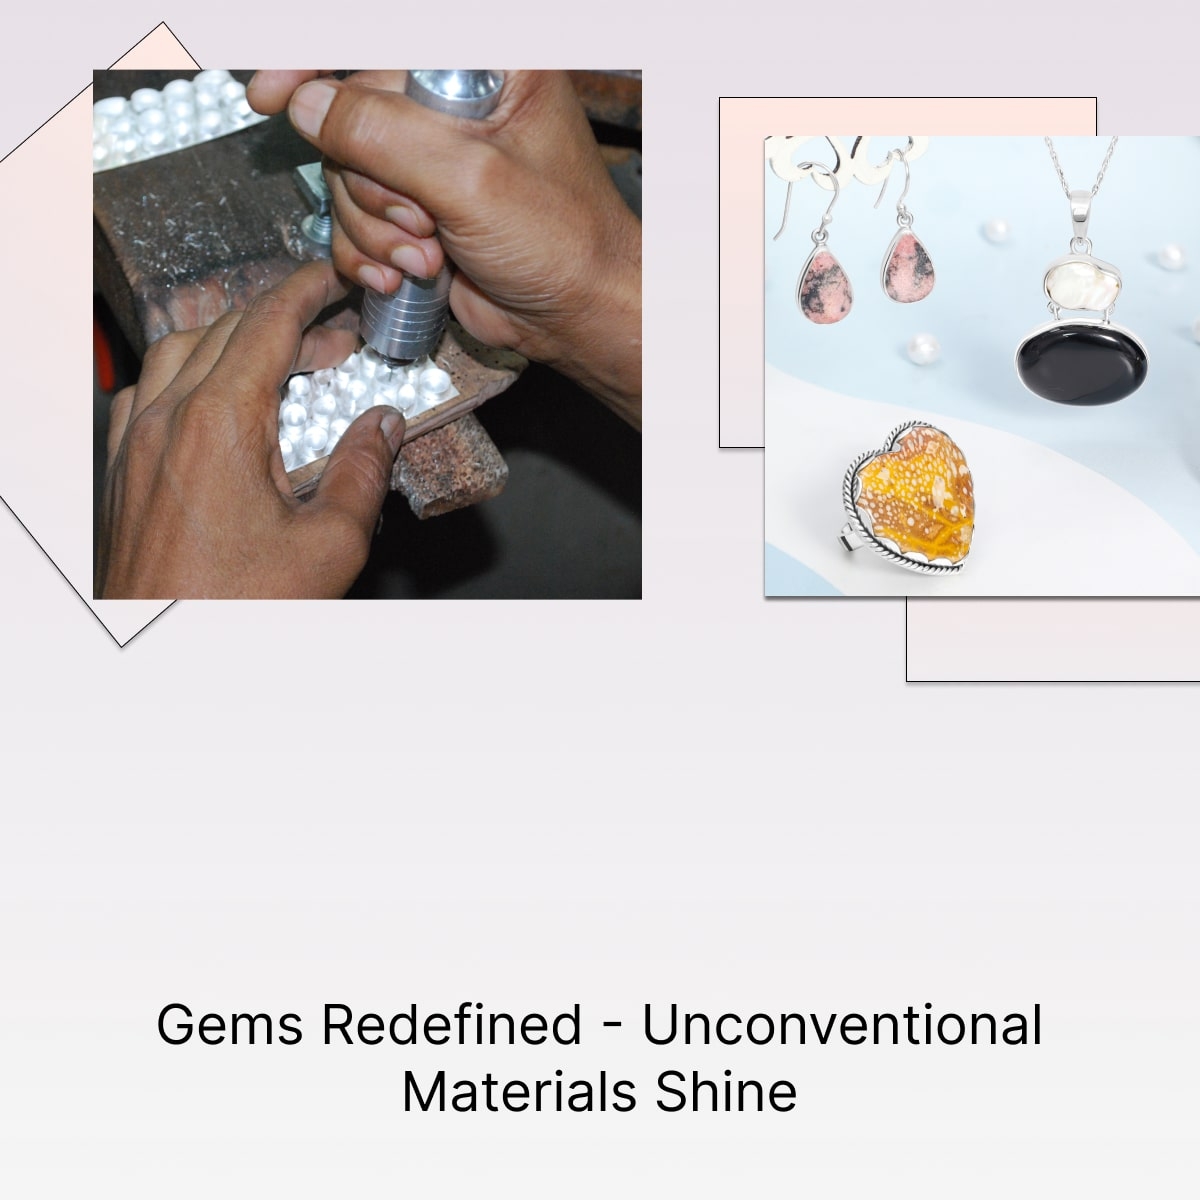 Unconventional Gemstones and Materials